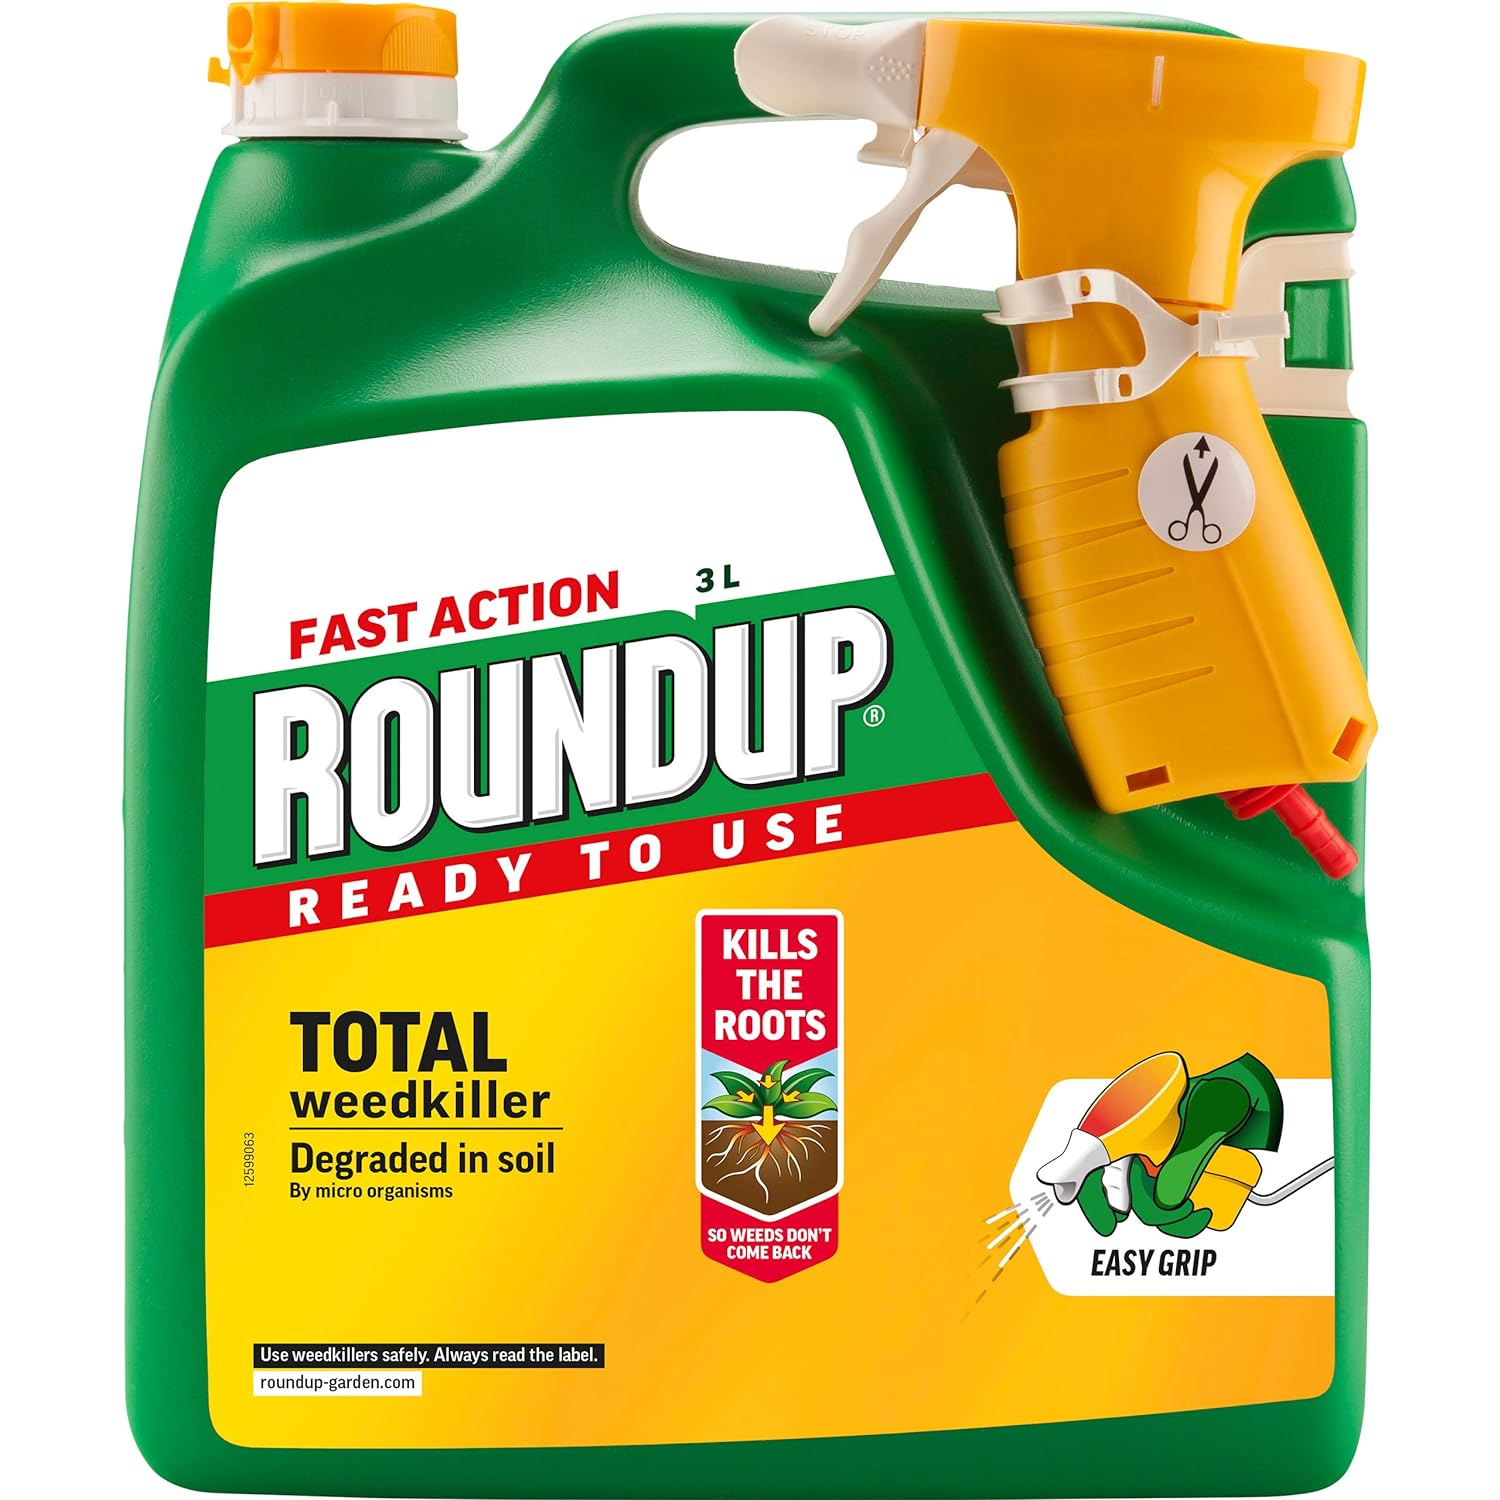 How Long Does Roundup Take To Kill Grass